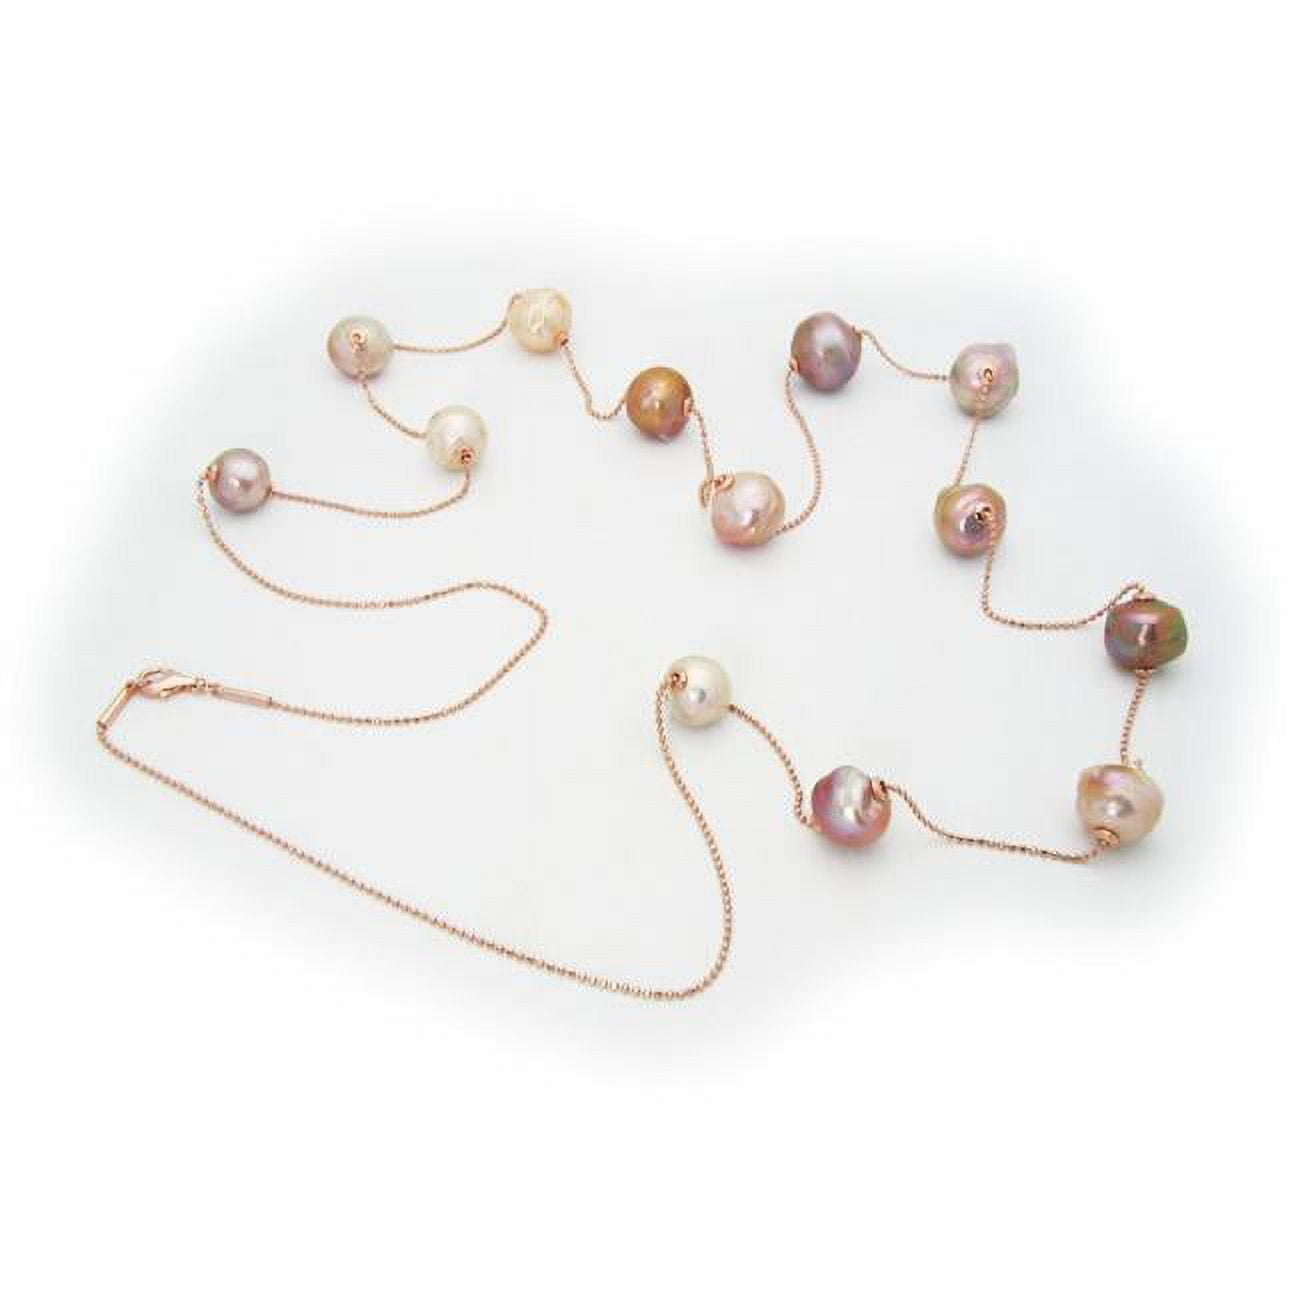 Picture of Fronay 201201 Multicolor Cultured Freshwater Pearl Necklace in Sterling Silver